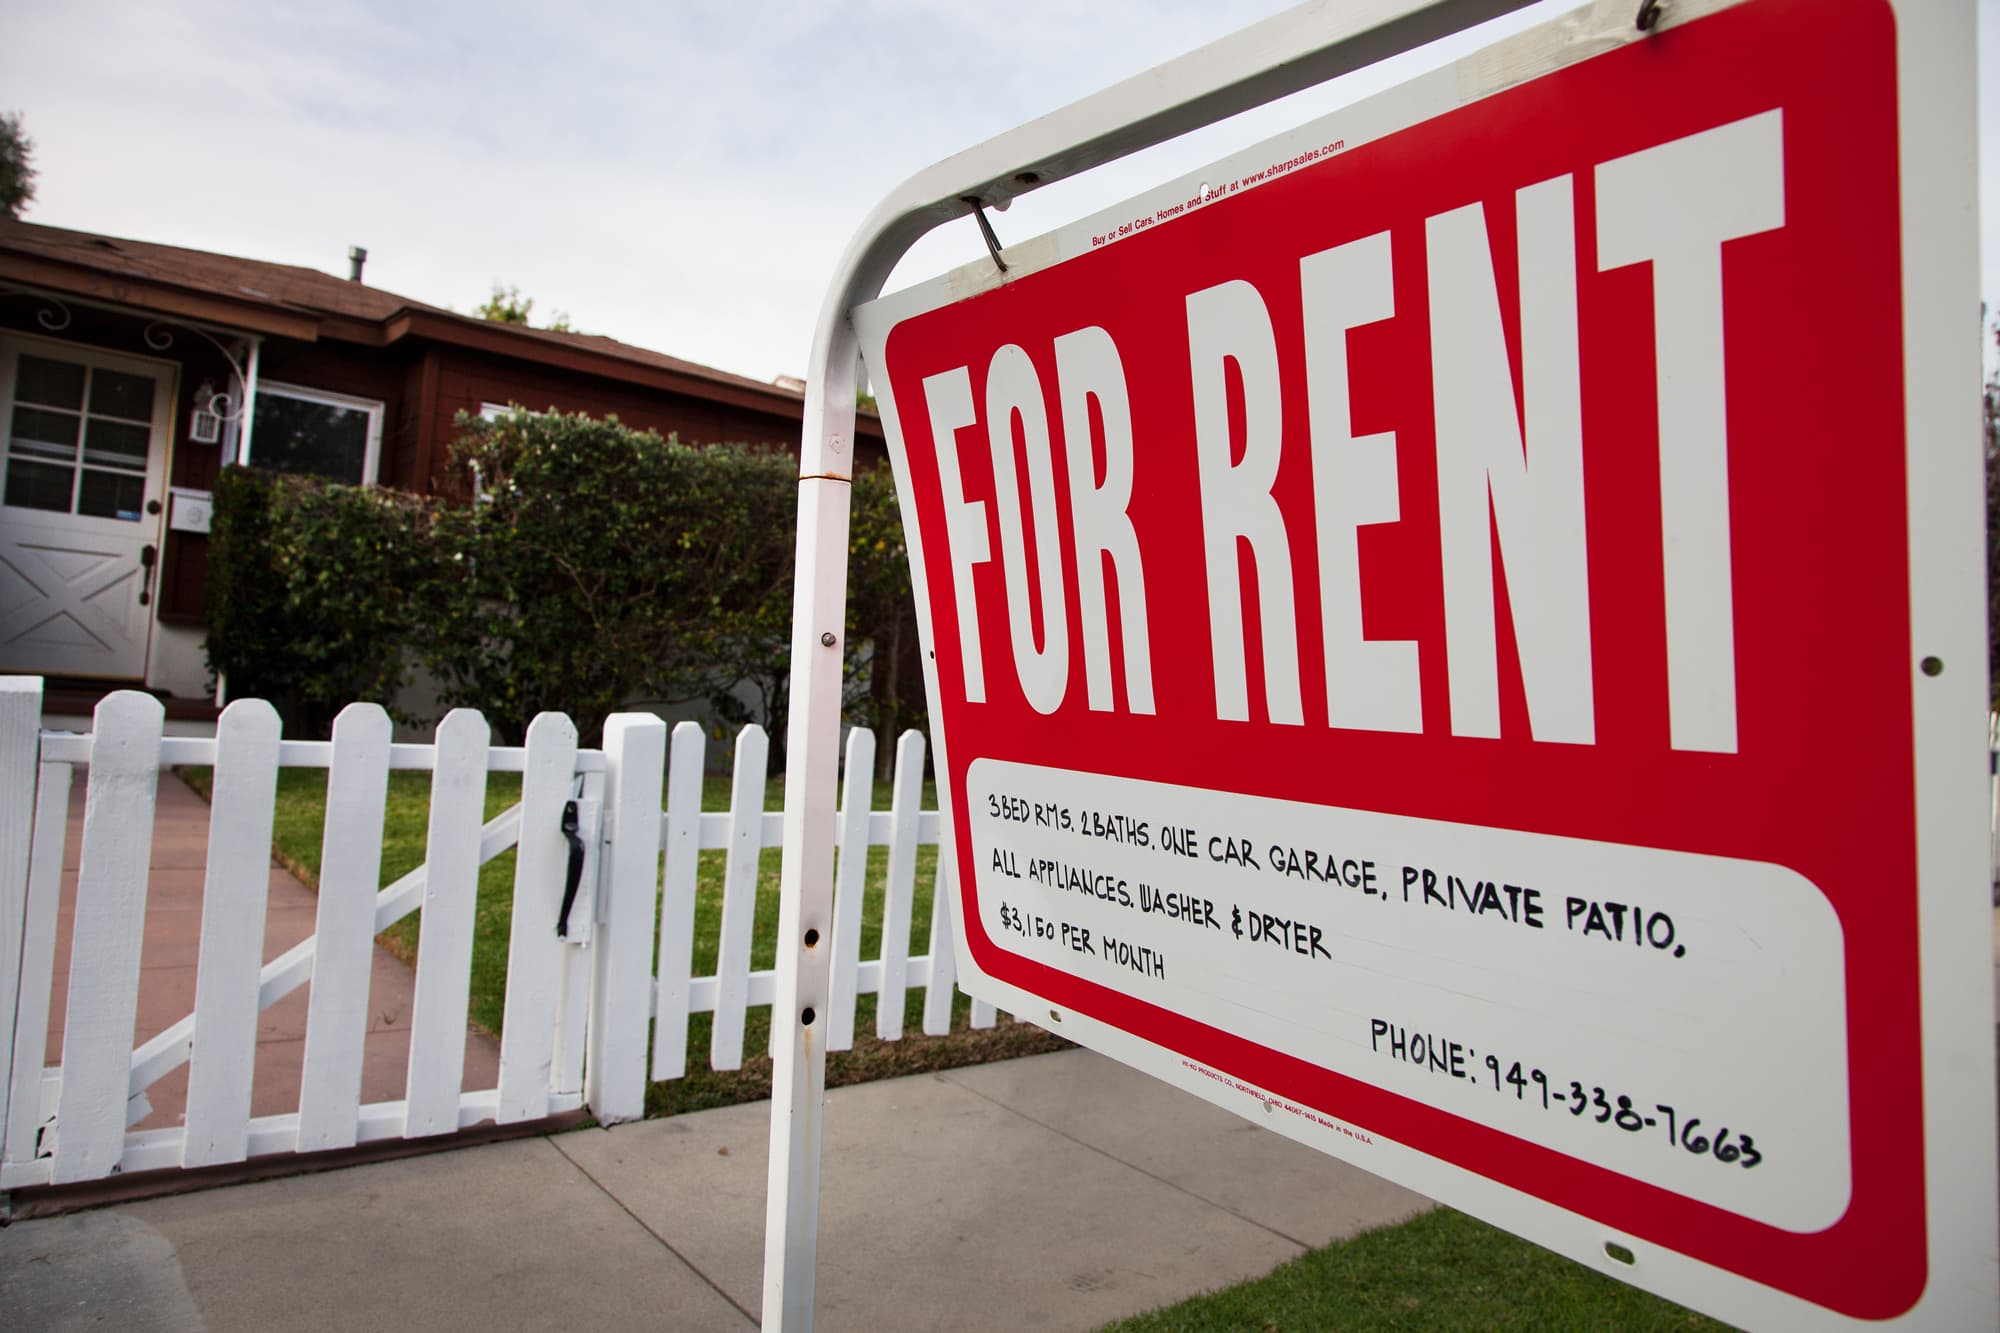 Single-family rent prices are surging at a record rate, led by homes in Sun Belt cities like Miami and Phoenix